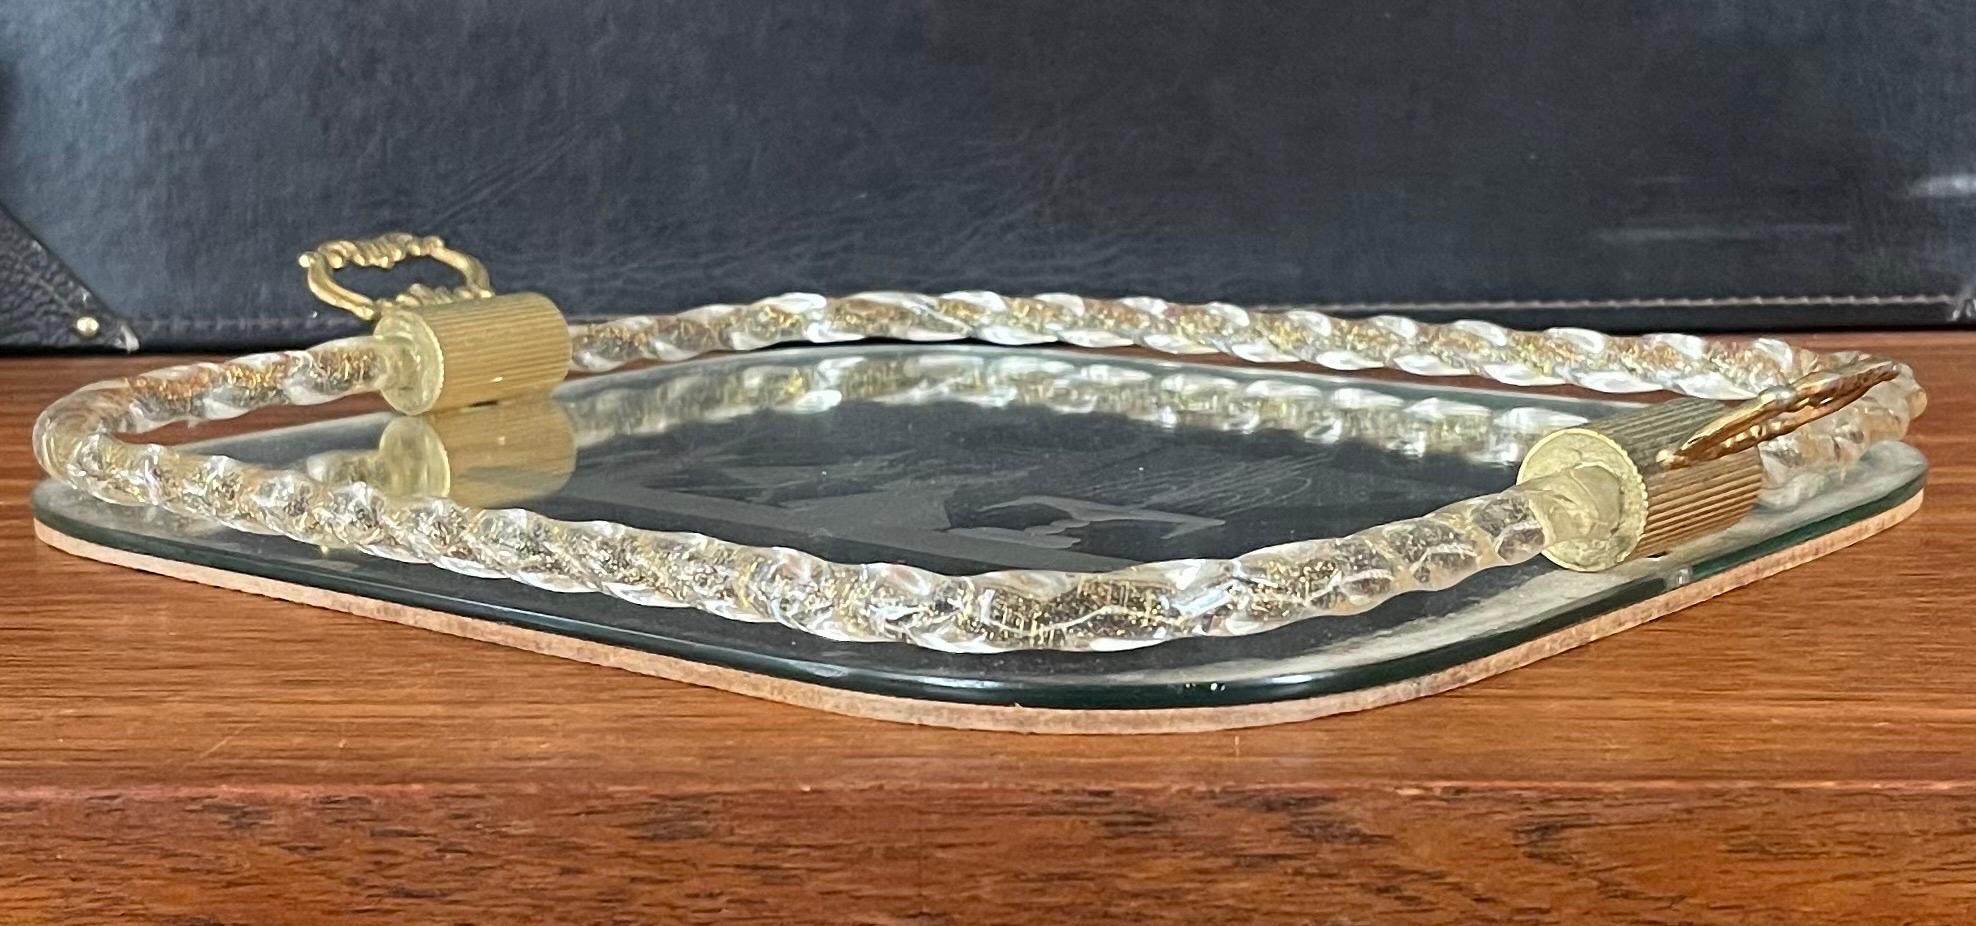 Mirrored Engraved Glass Serving Tray by Ercole Barovier for Murano Glass For Sale 7